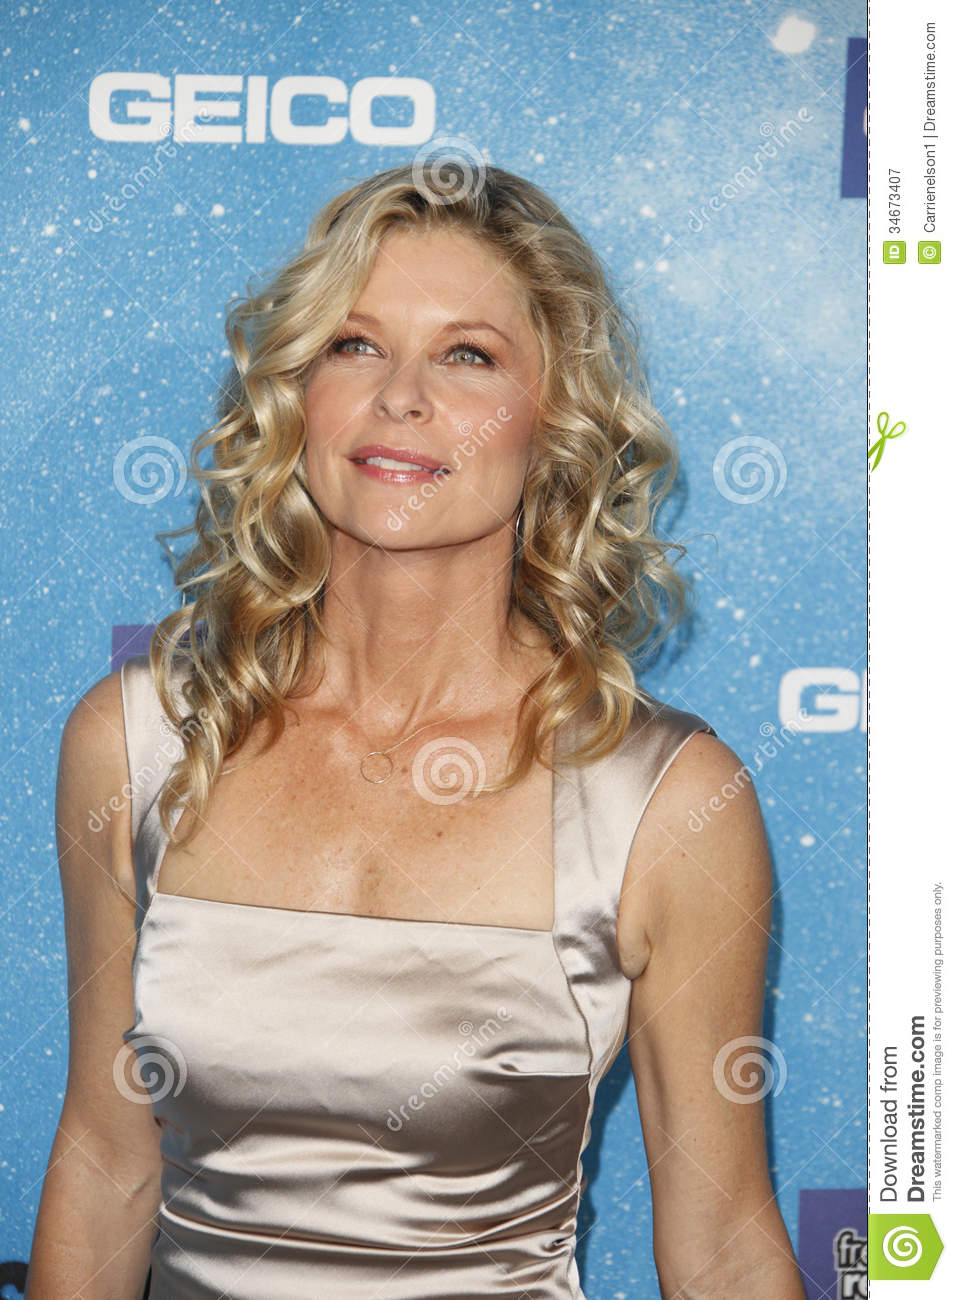 kate-vernon-images